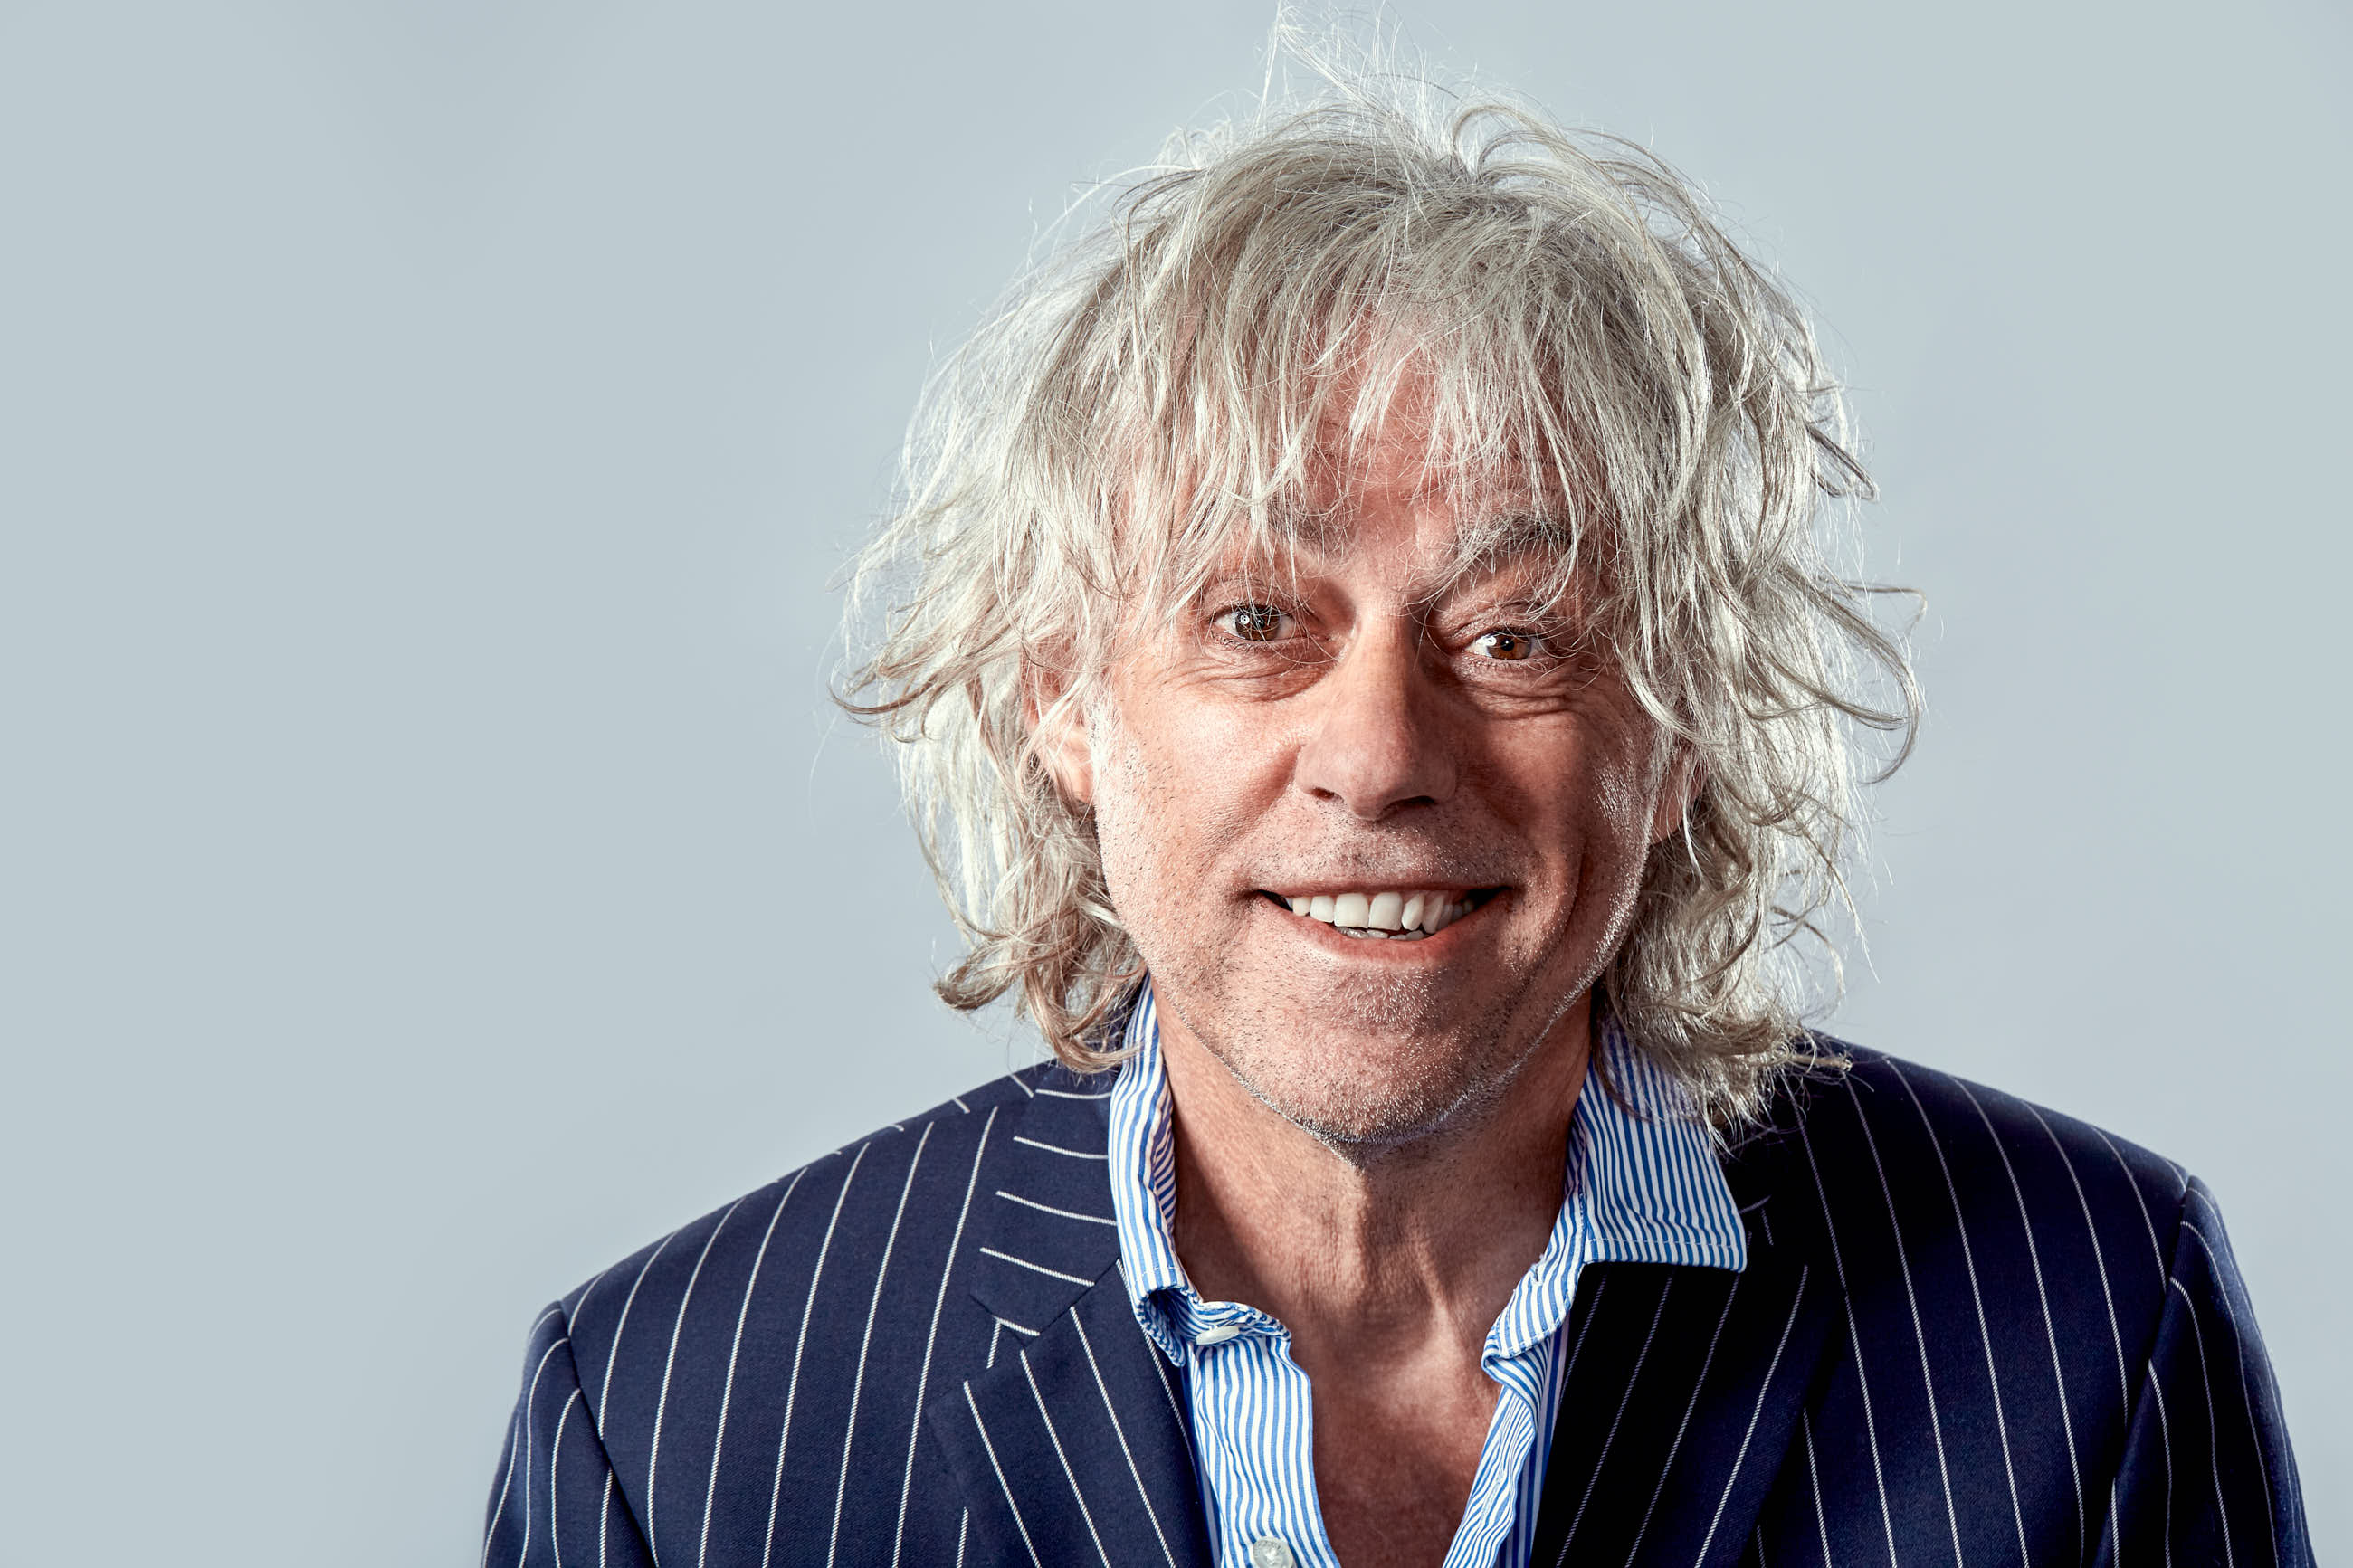 a portrait of Bob Geldof by Jack Terry, all rights reserved